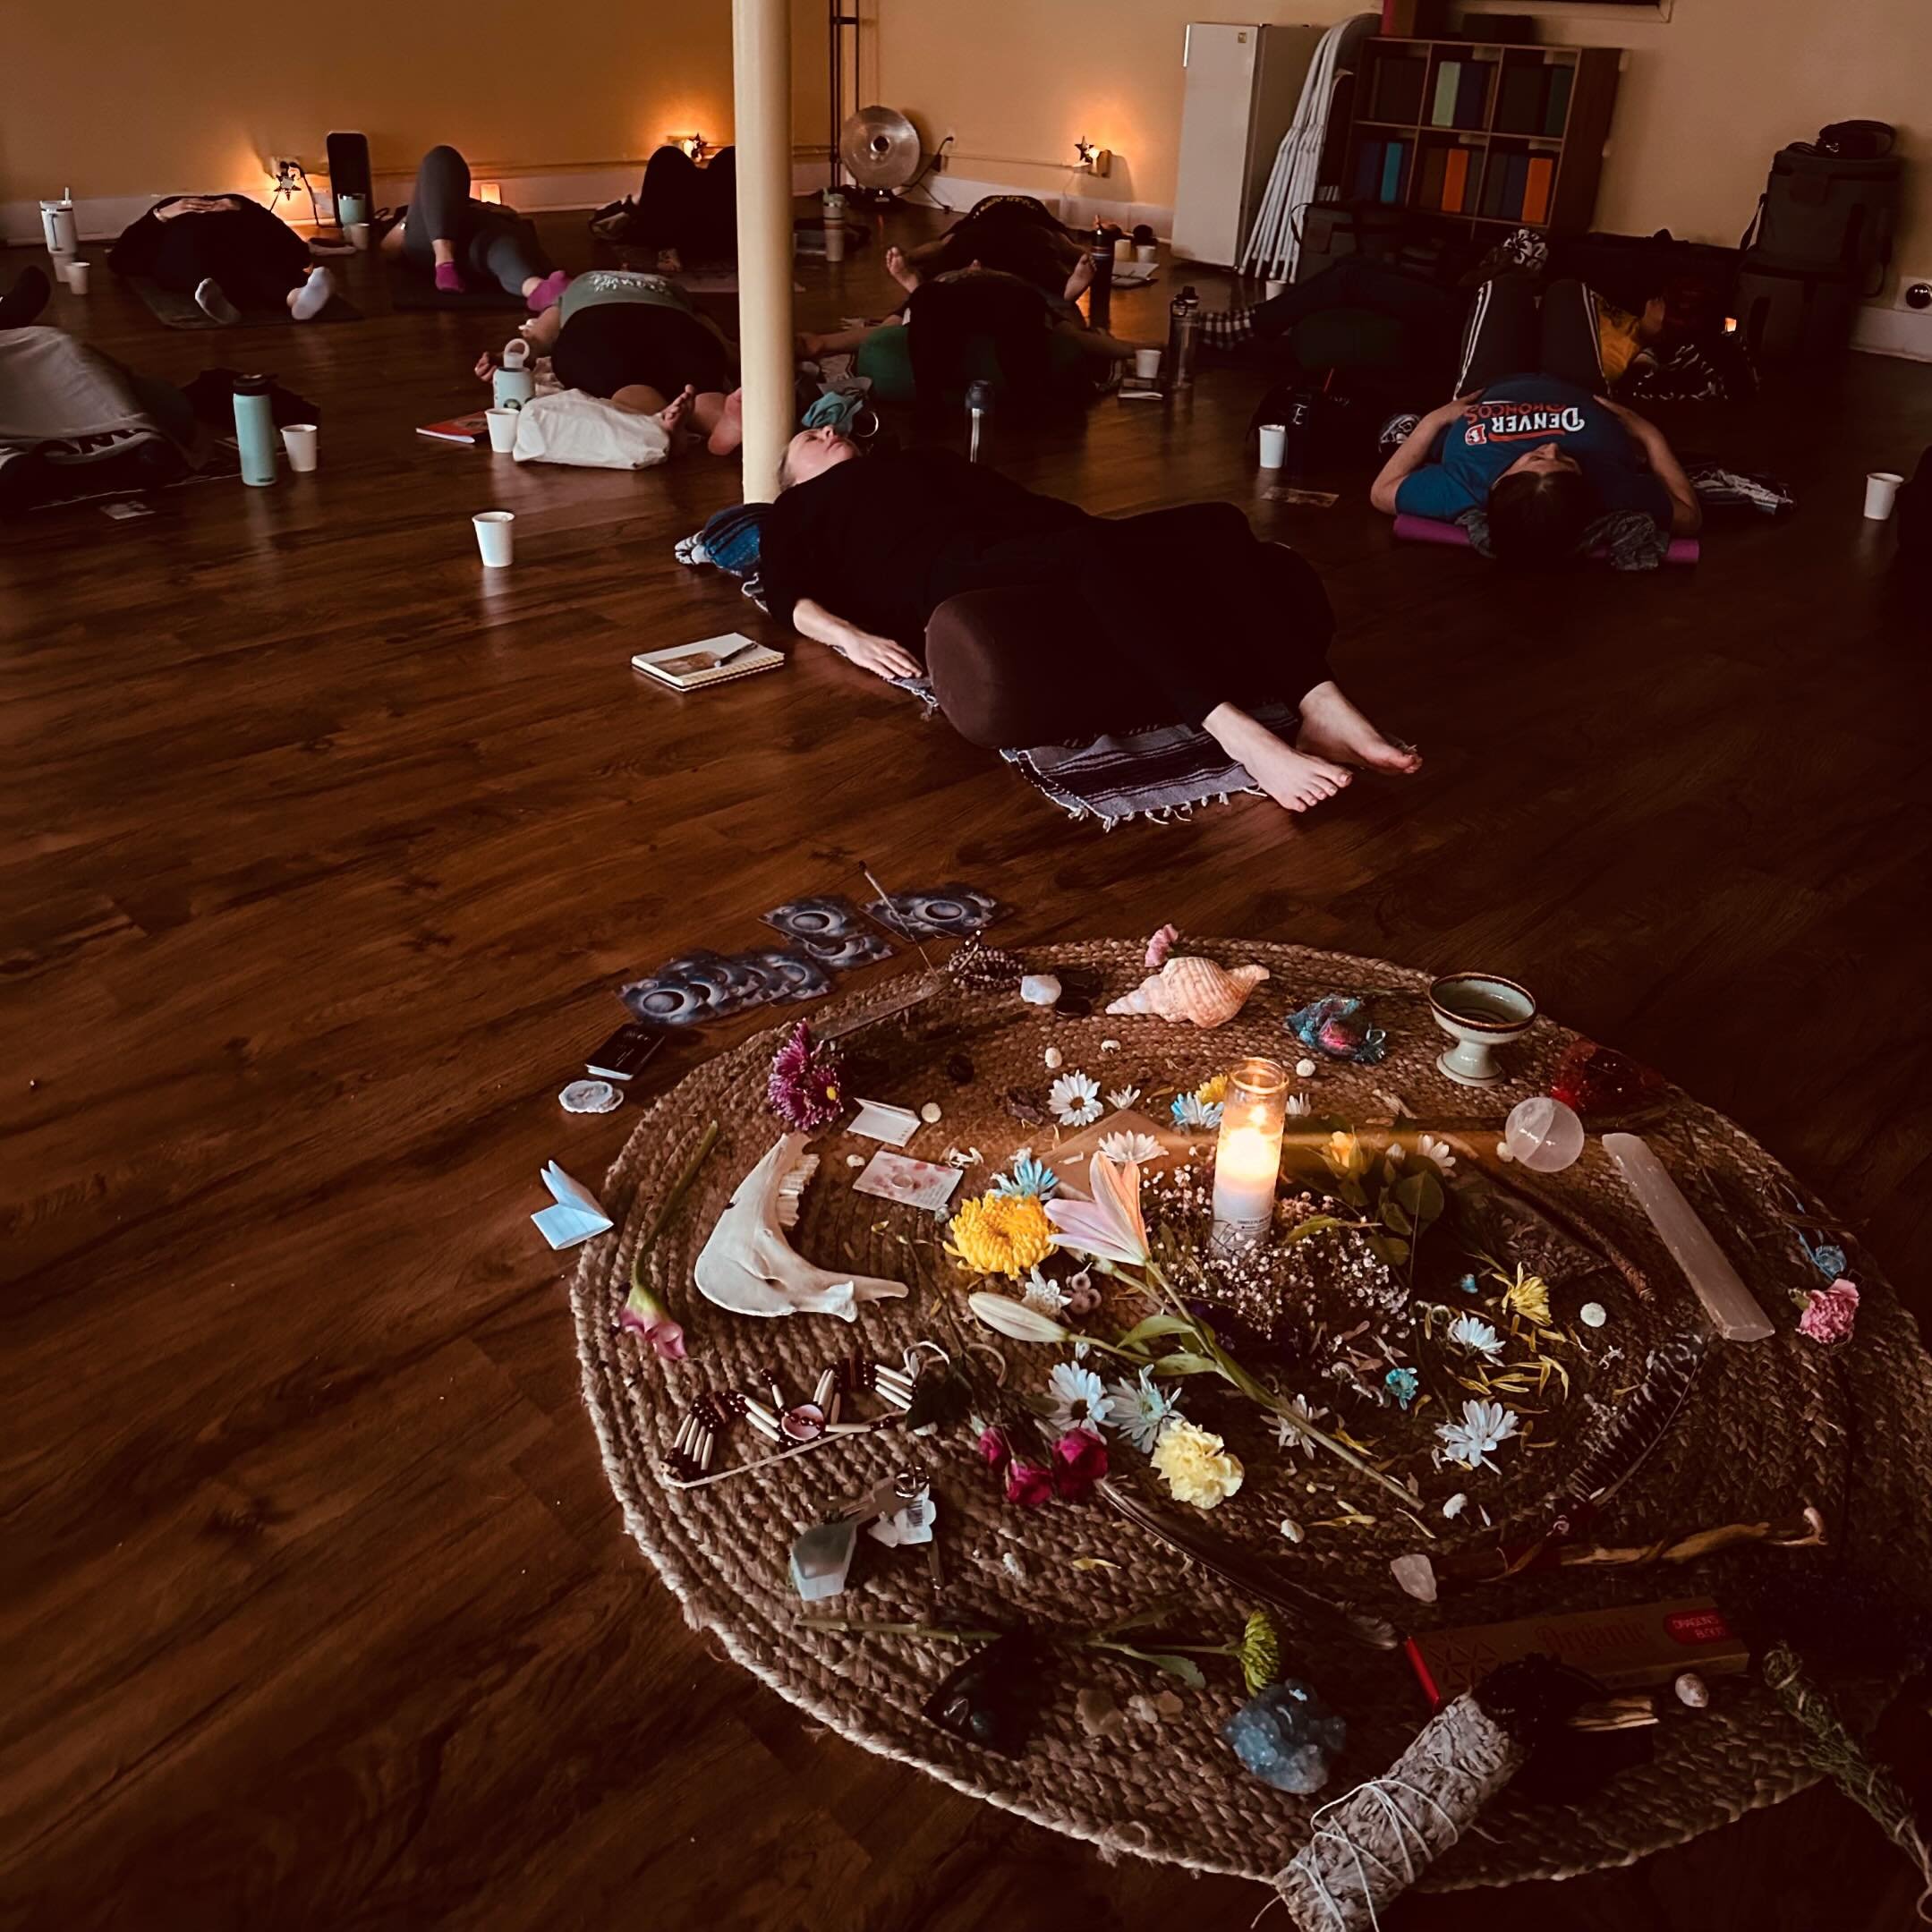 The next Community Cacao Ceremony is this Saturday, April 27, at @yogaonbaxter in Louisville, Ky. 

During our ceremony, you&rsquo;ll have an opportunity to set intentions for your journey with ceremonial cacao. You also get to experience guided medi